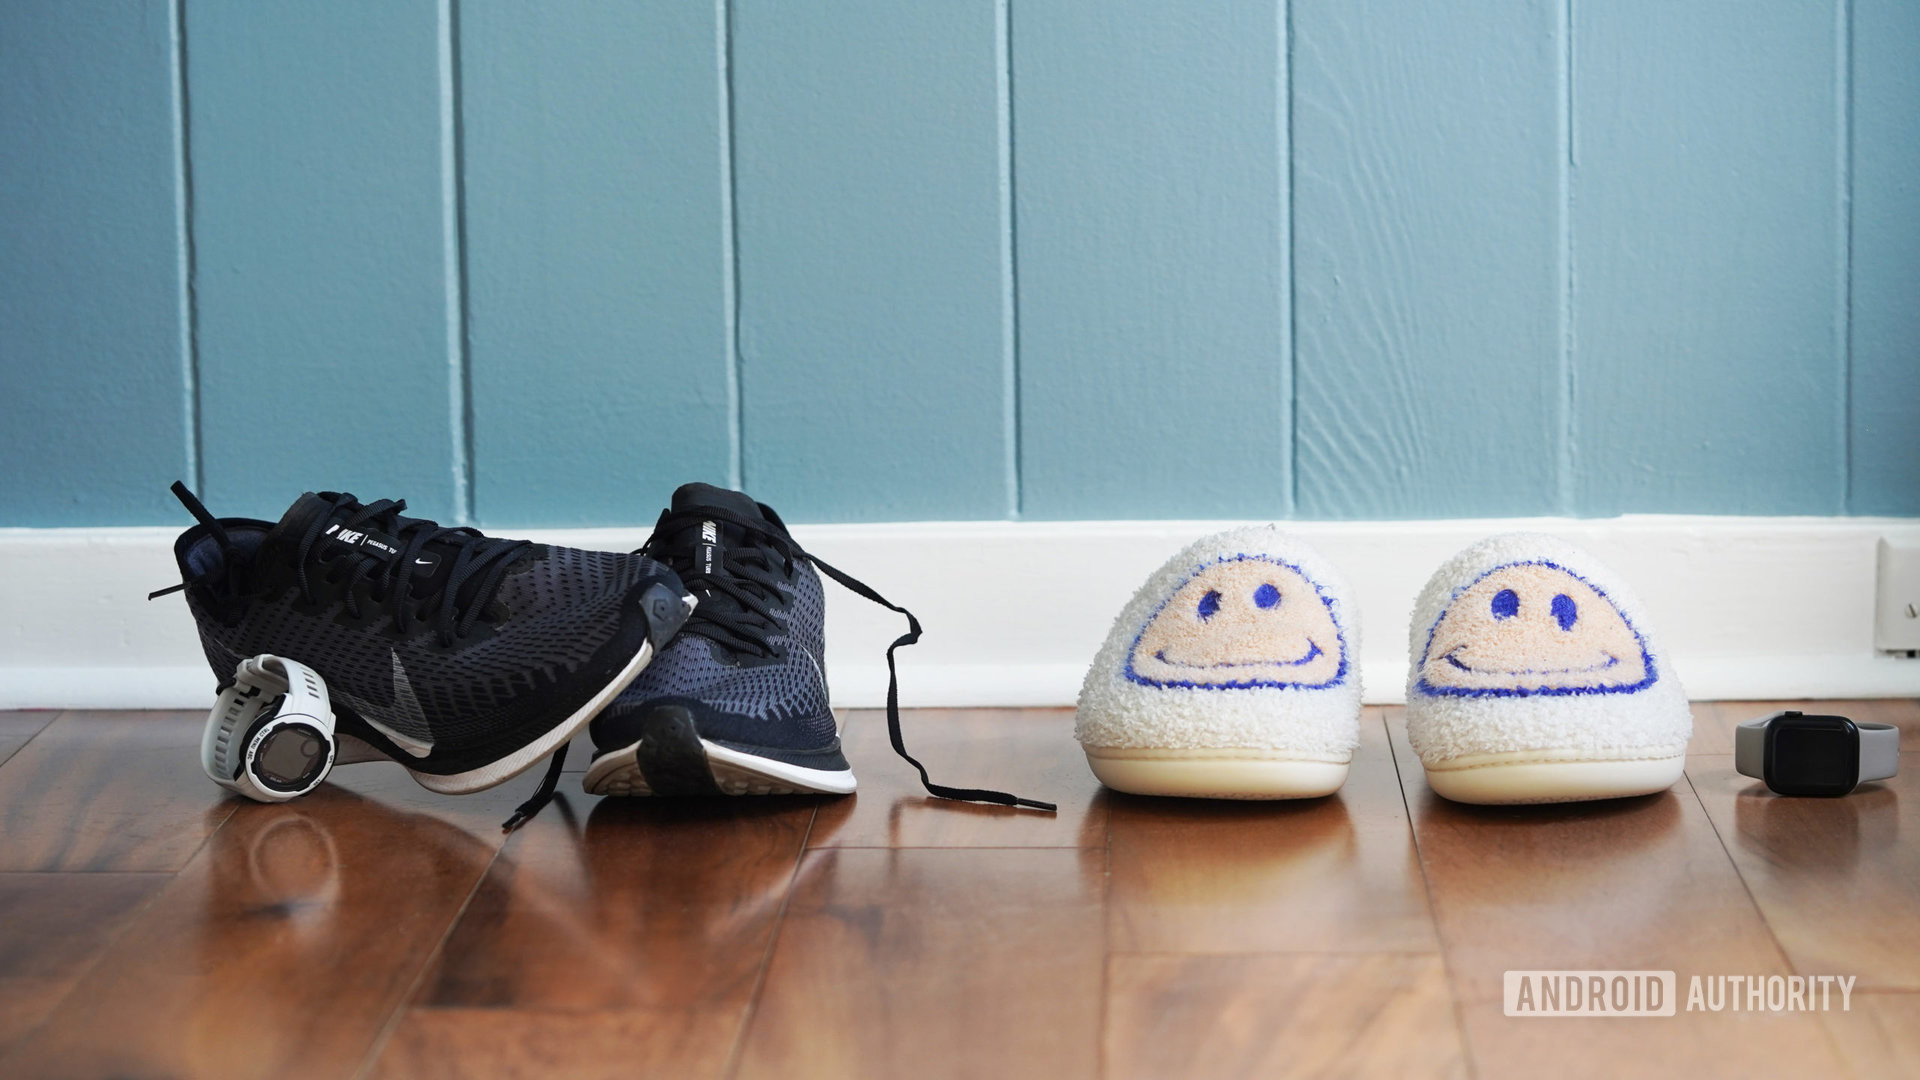 A pair of mens sneakers rest next to a pair of women's slippers.